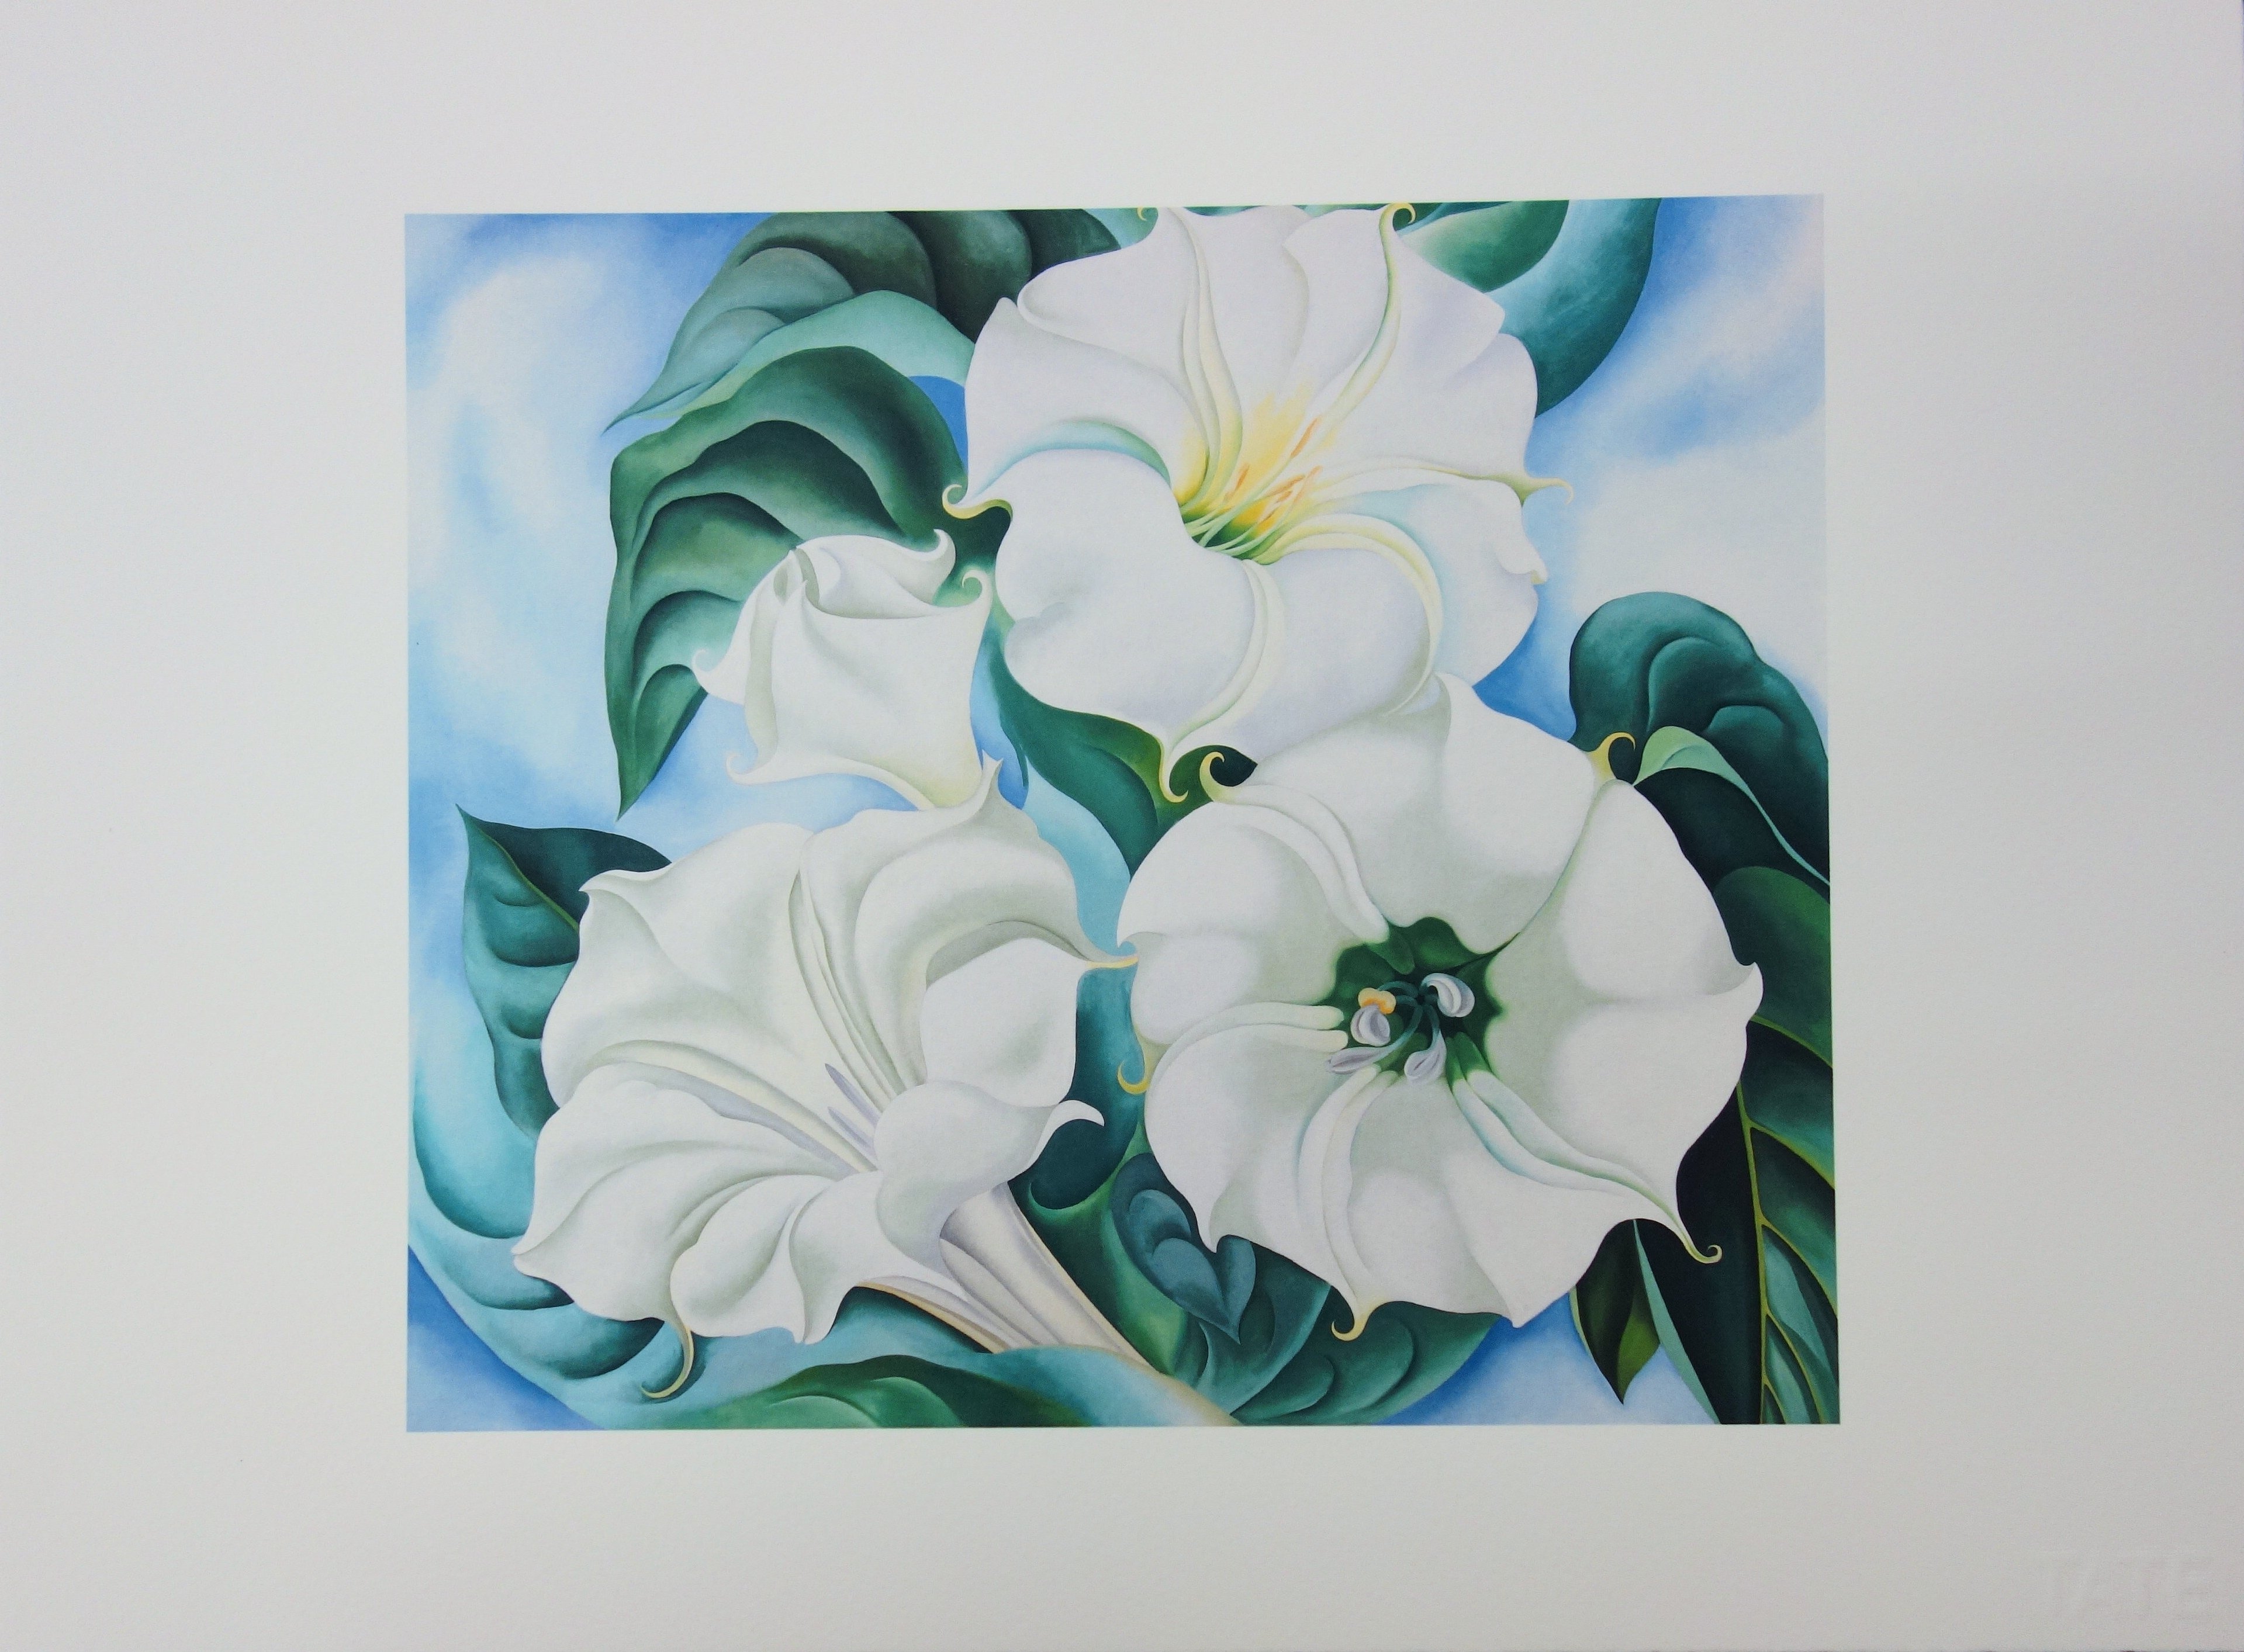 Artwork by Georgia O'Keeffe, Jimson Weed, Made of Giclee on wove Sommerset paper